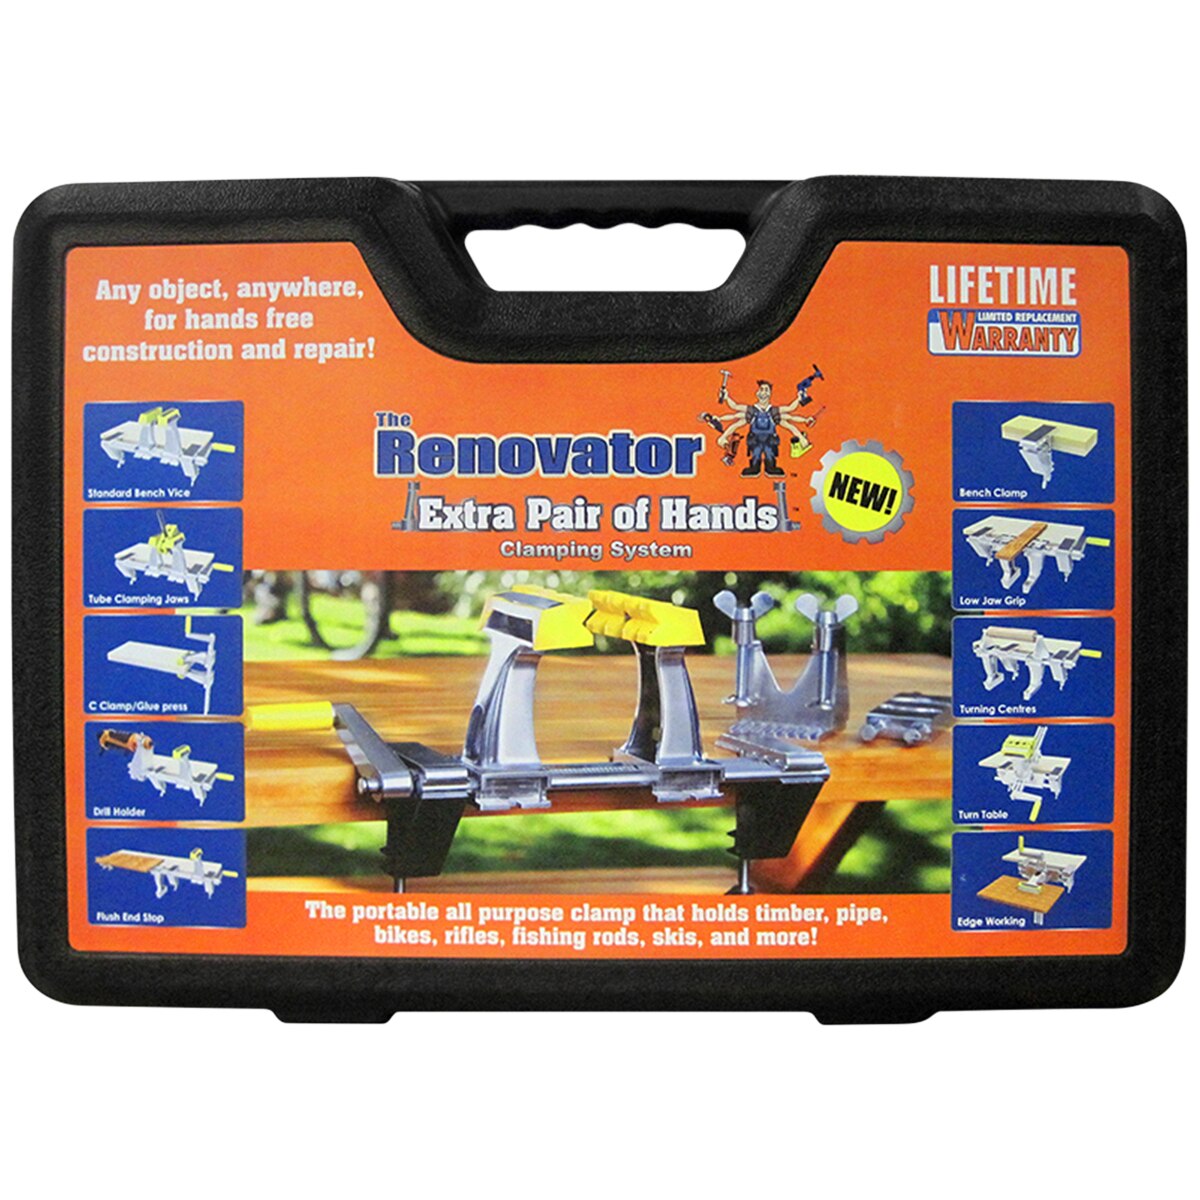 The Renovator Extra Pair of Hands Tools